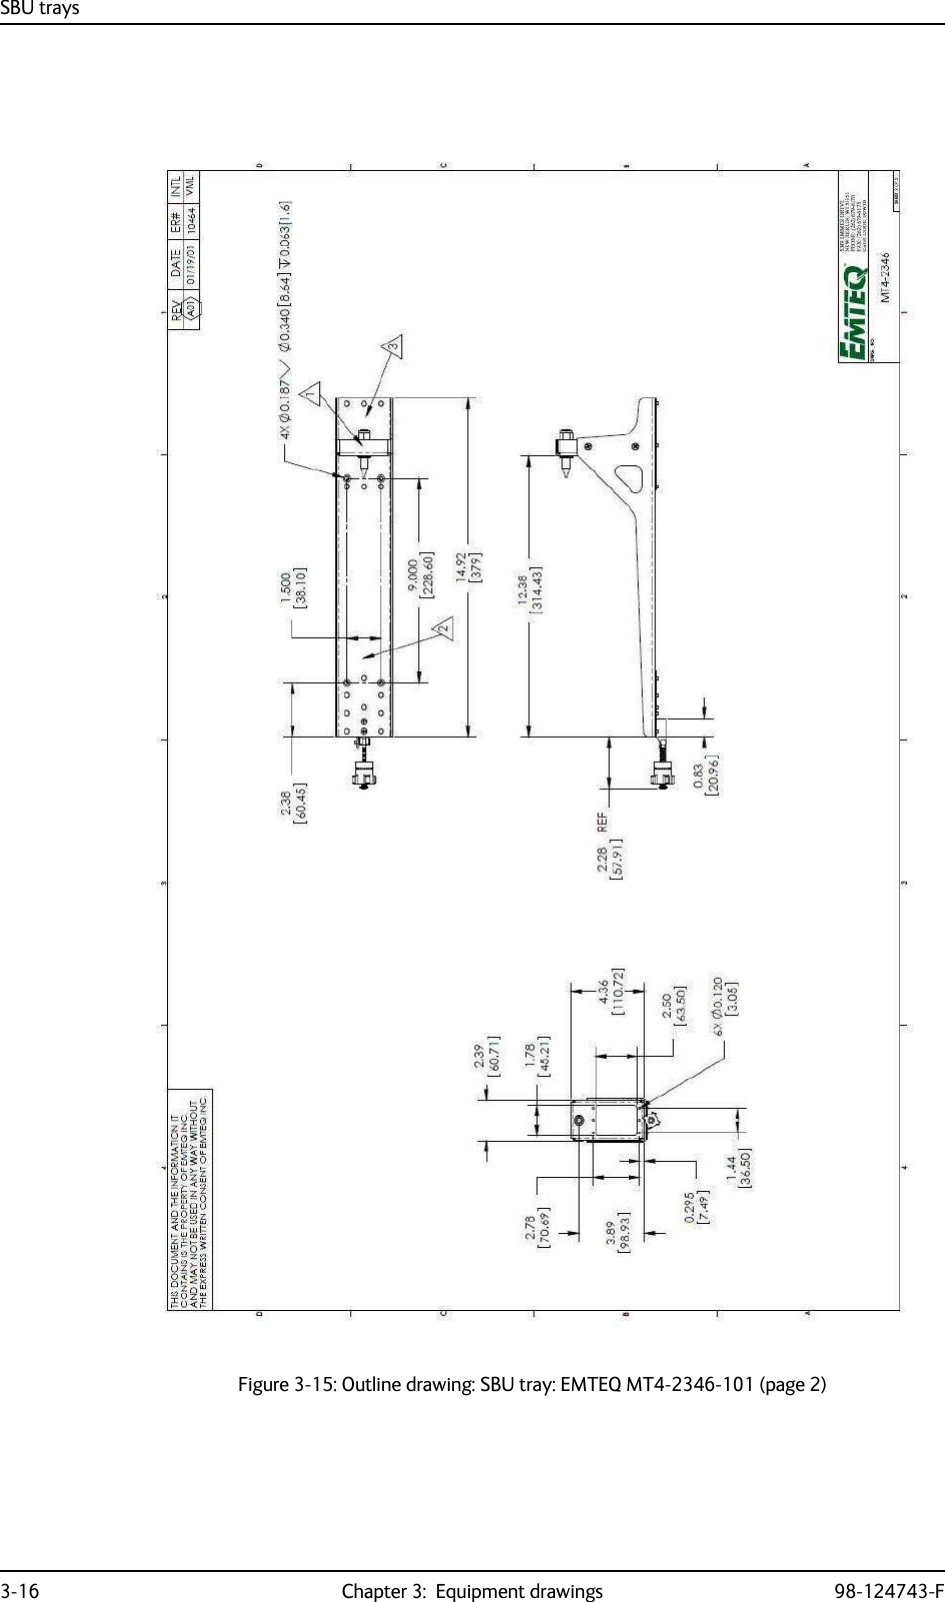 Figure 3-15: Outline drawing: SBU tray: EMTEQ MT4-2346-101 (page 2)SBU trays3-16 Chapter 3:  Equipment drawings 98-124743-F